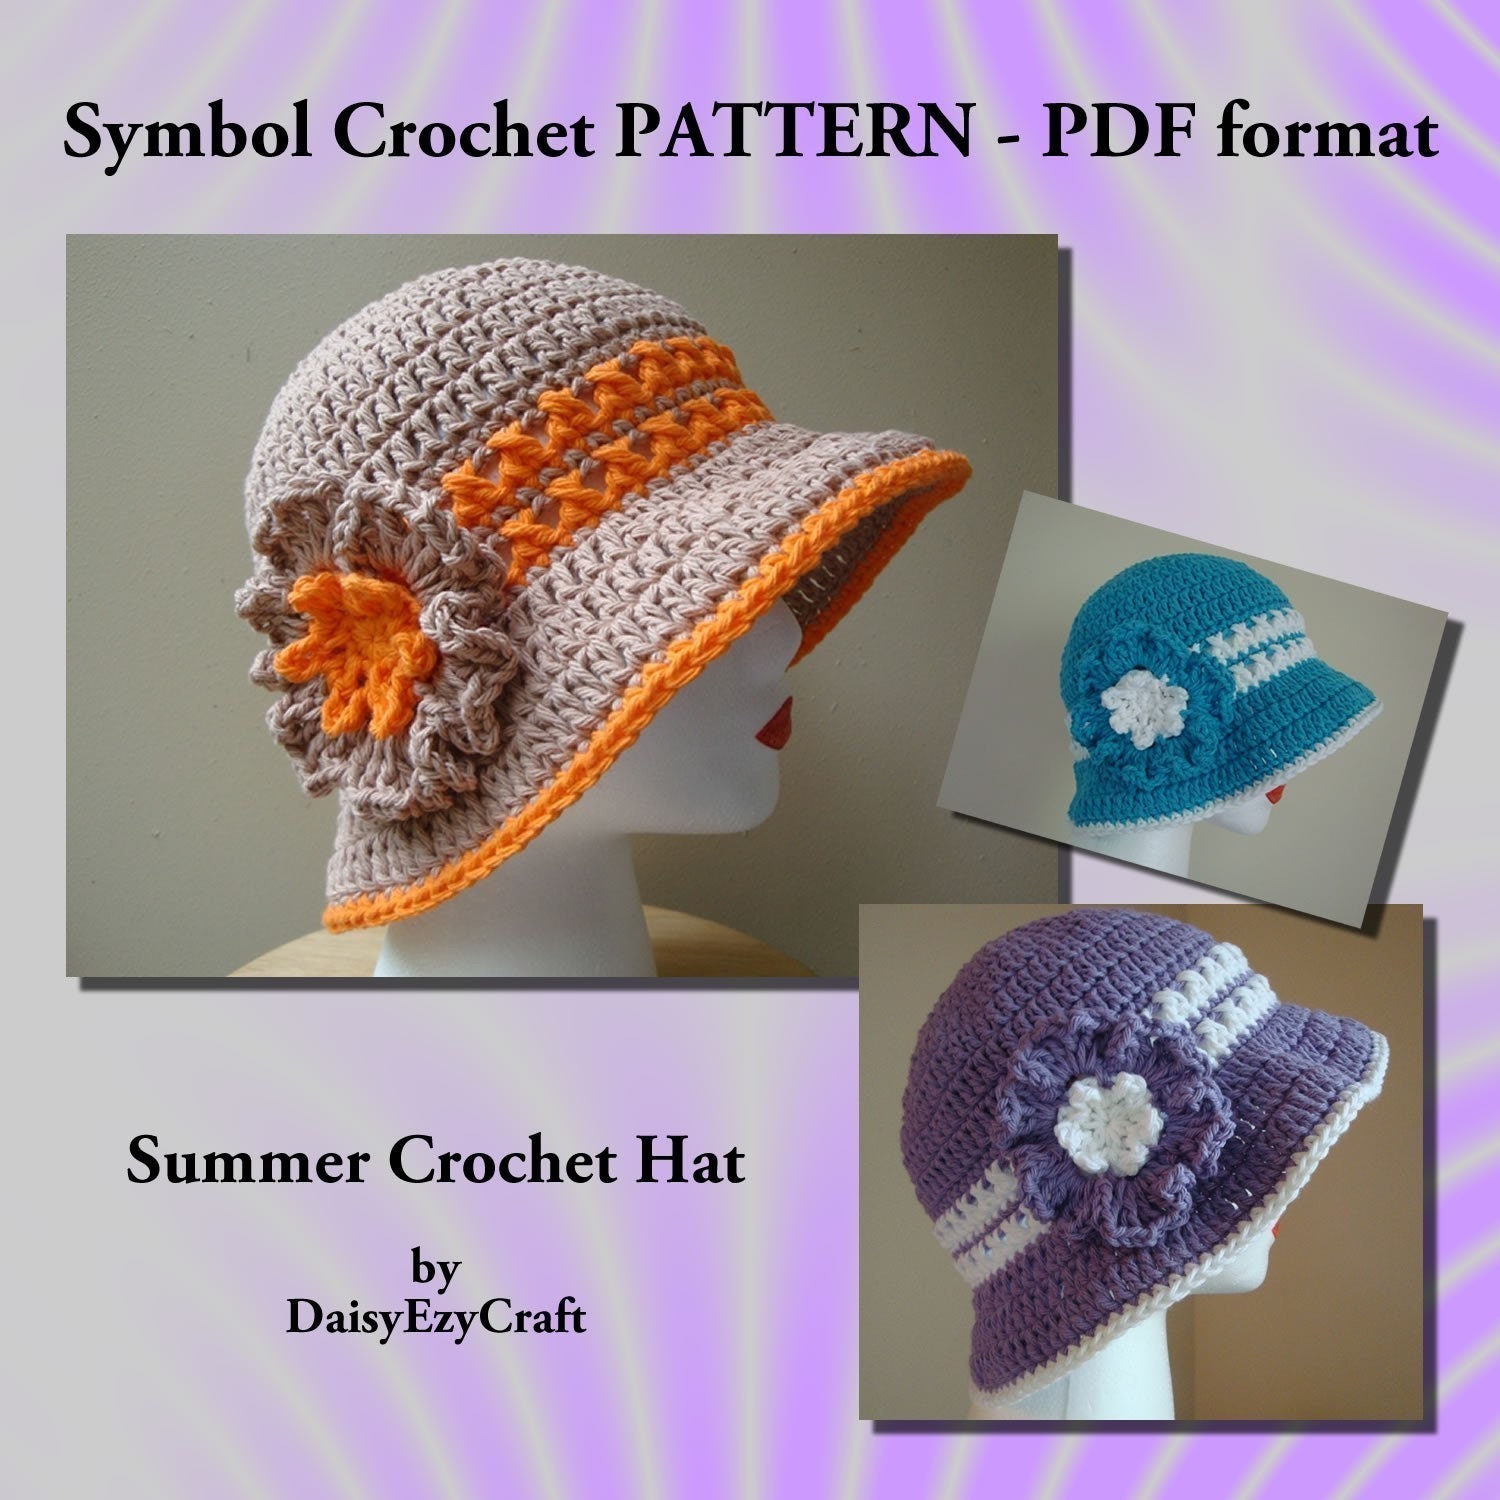 FREE HAT CROCHET PATTERNS FROM OUR FREE CROCHET PATTERNS